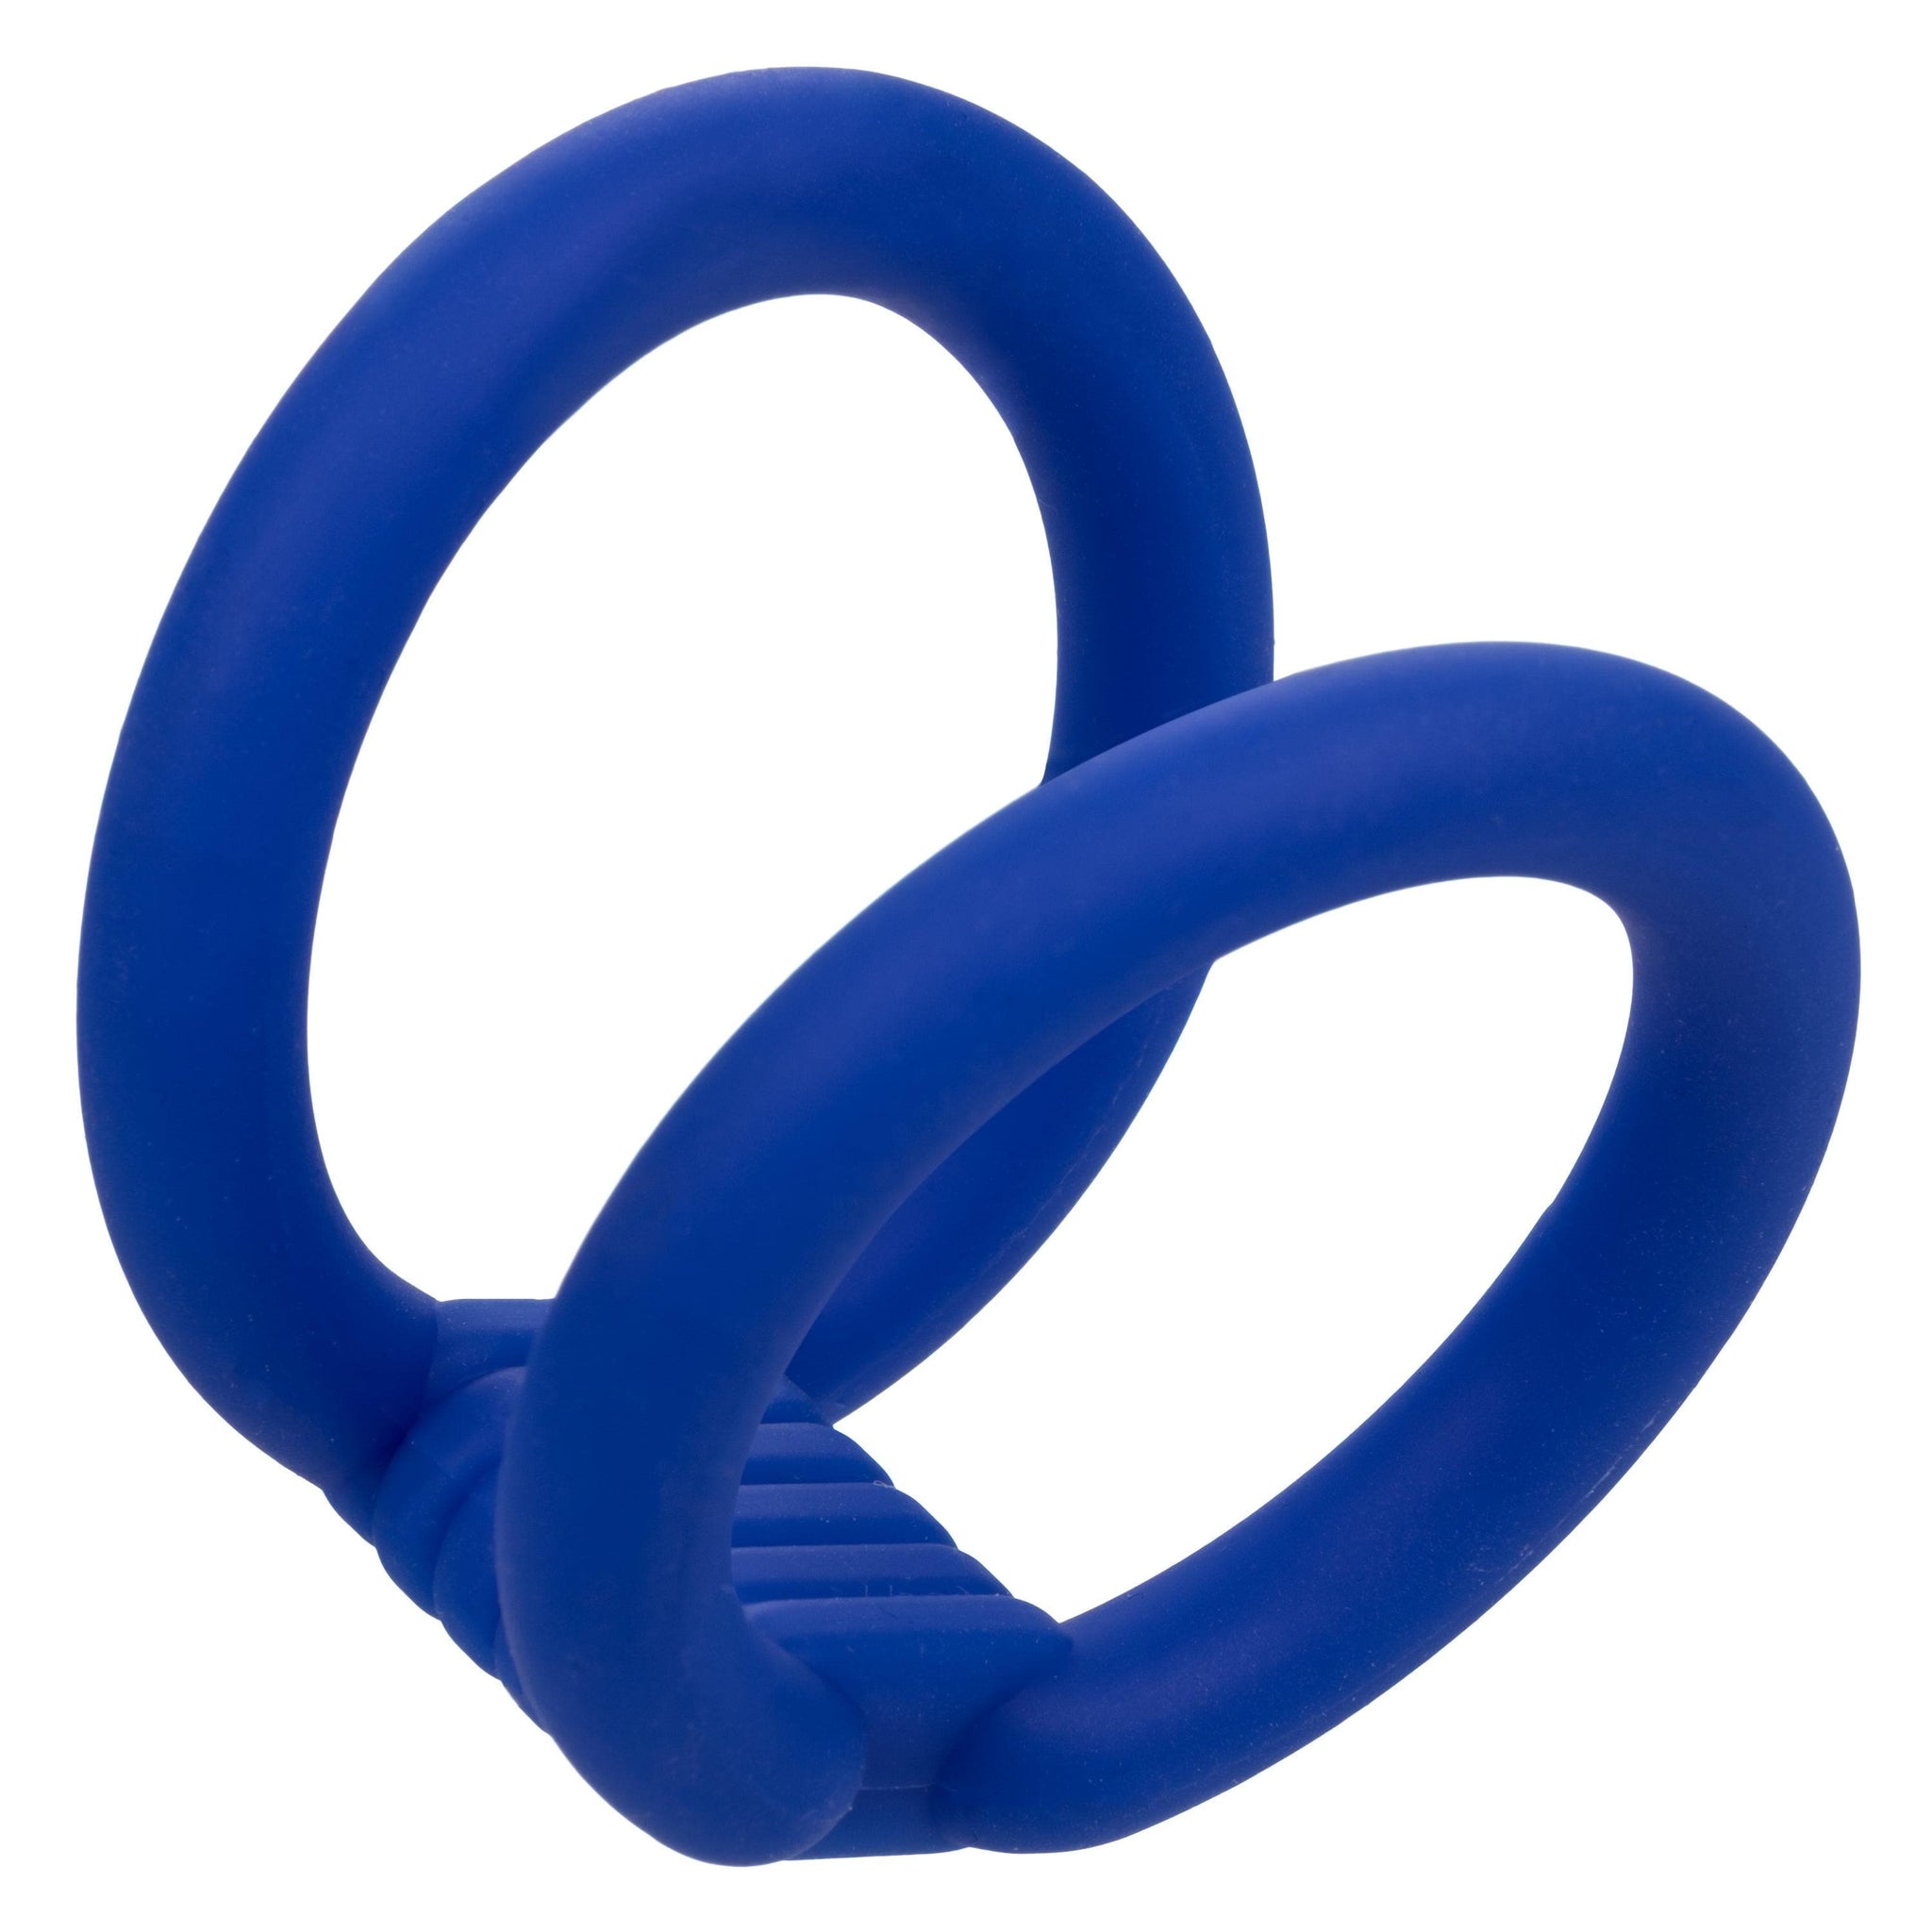 Viceroy Dual Ring Silicone Penis Ring - Romantic Blessings